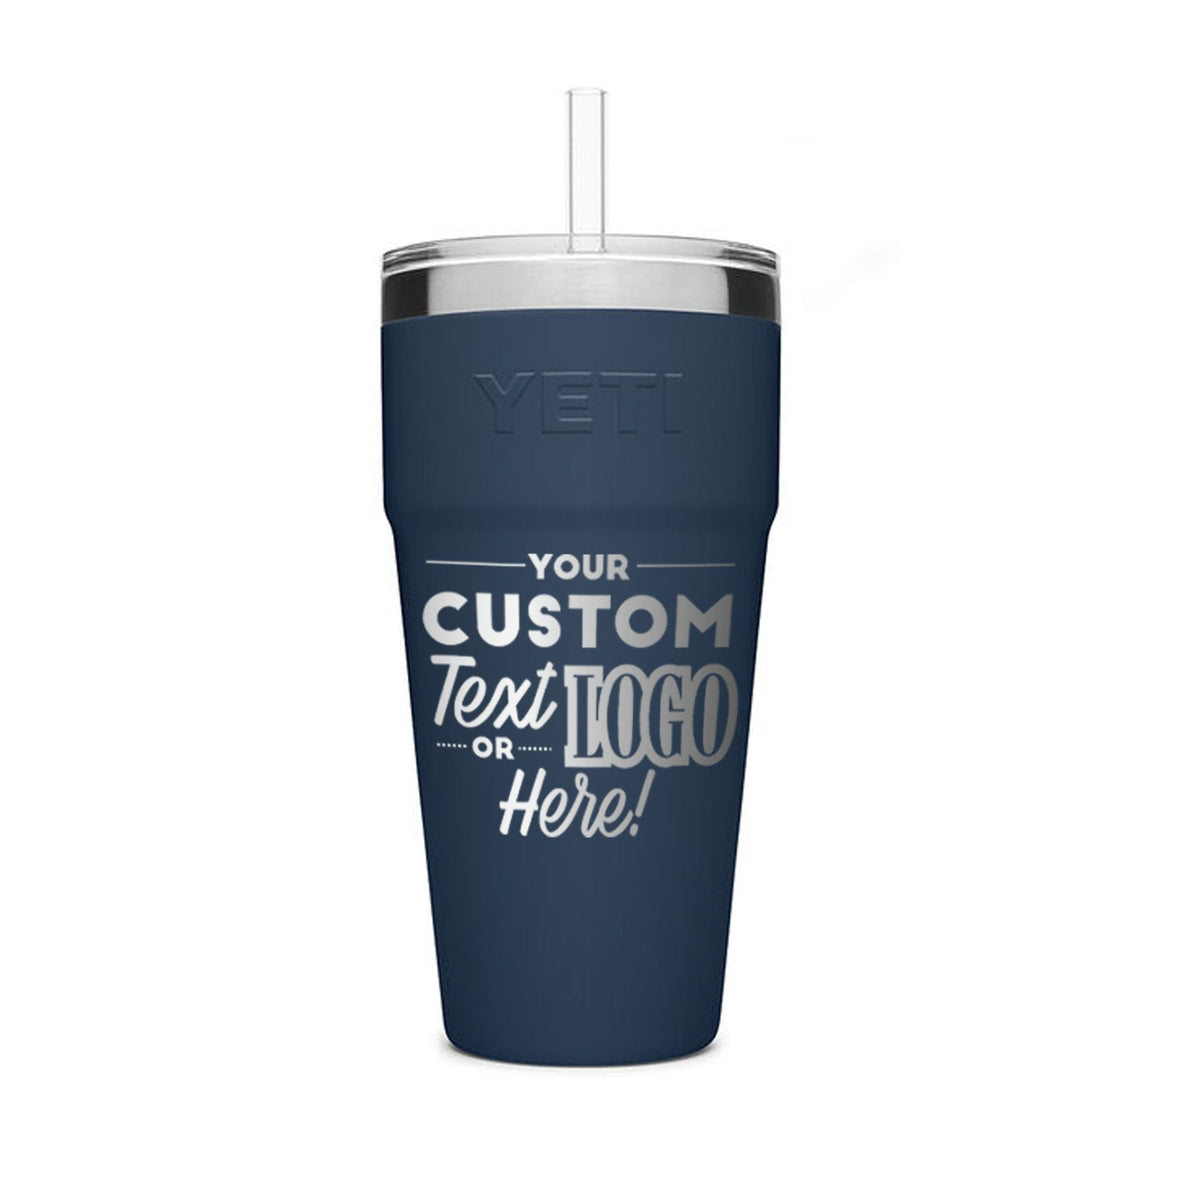 YETI RAMBLER 26 OZ STACKABLE CUP WITH STRAW CUP